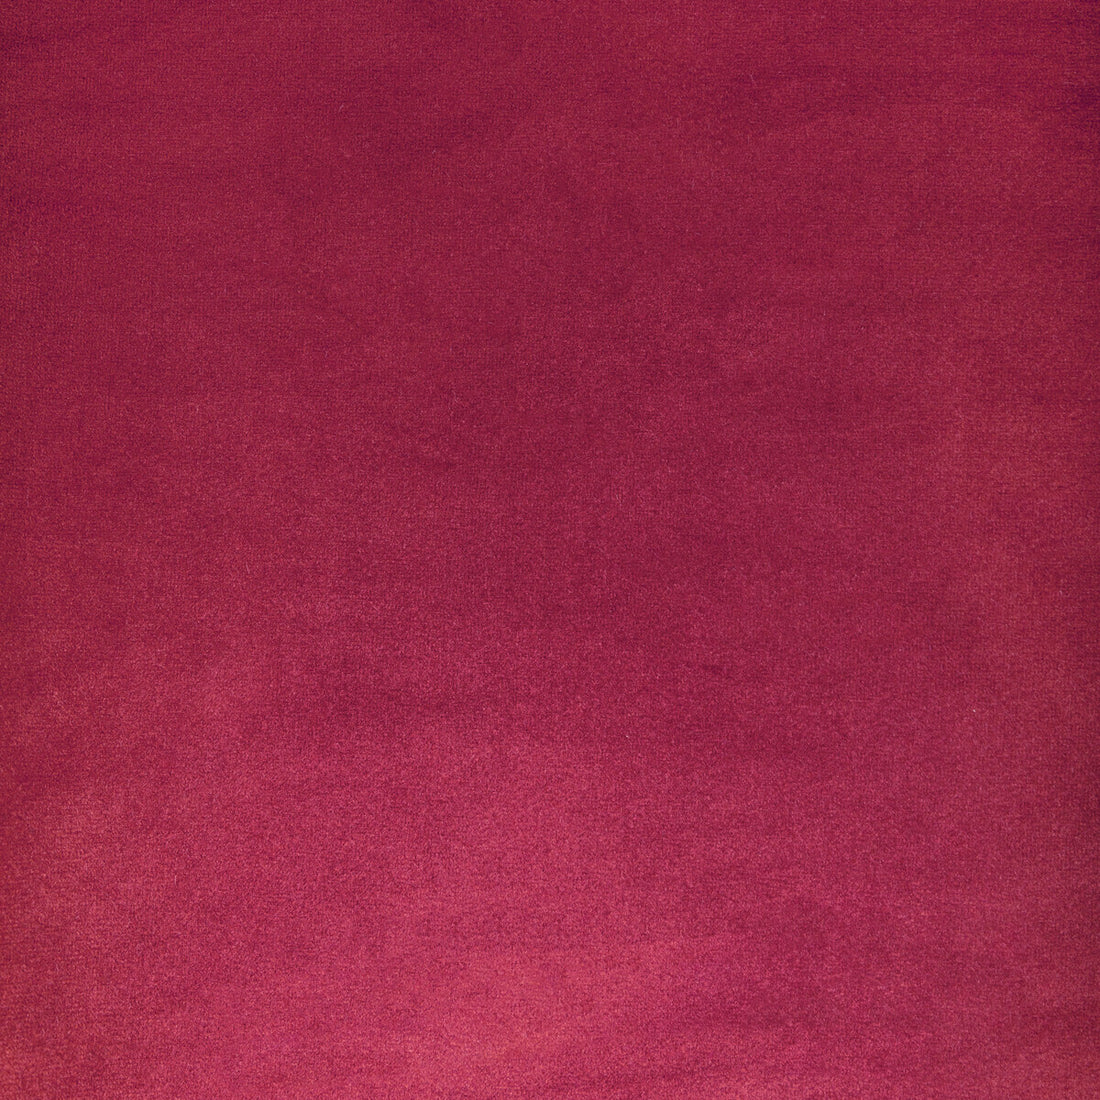 Rocco Velvet fabric in rosa color - pattern KW-10065.3685MG39.0 - by Kravet Contract